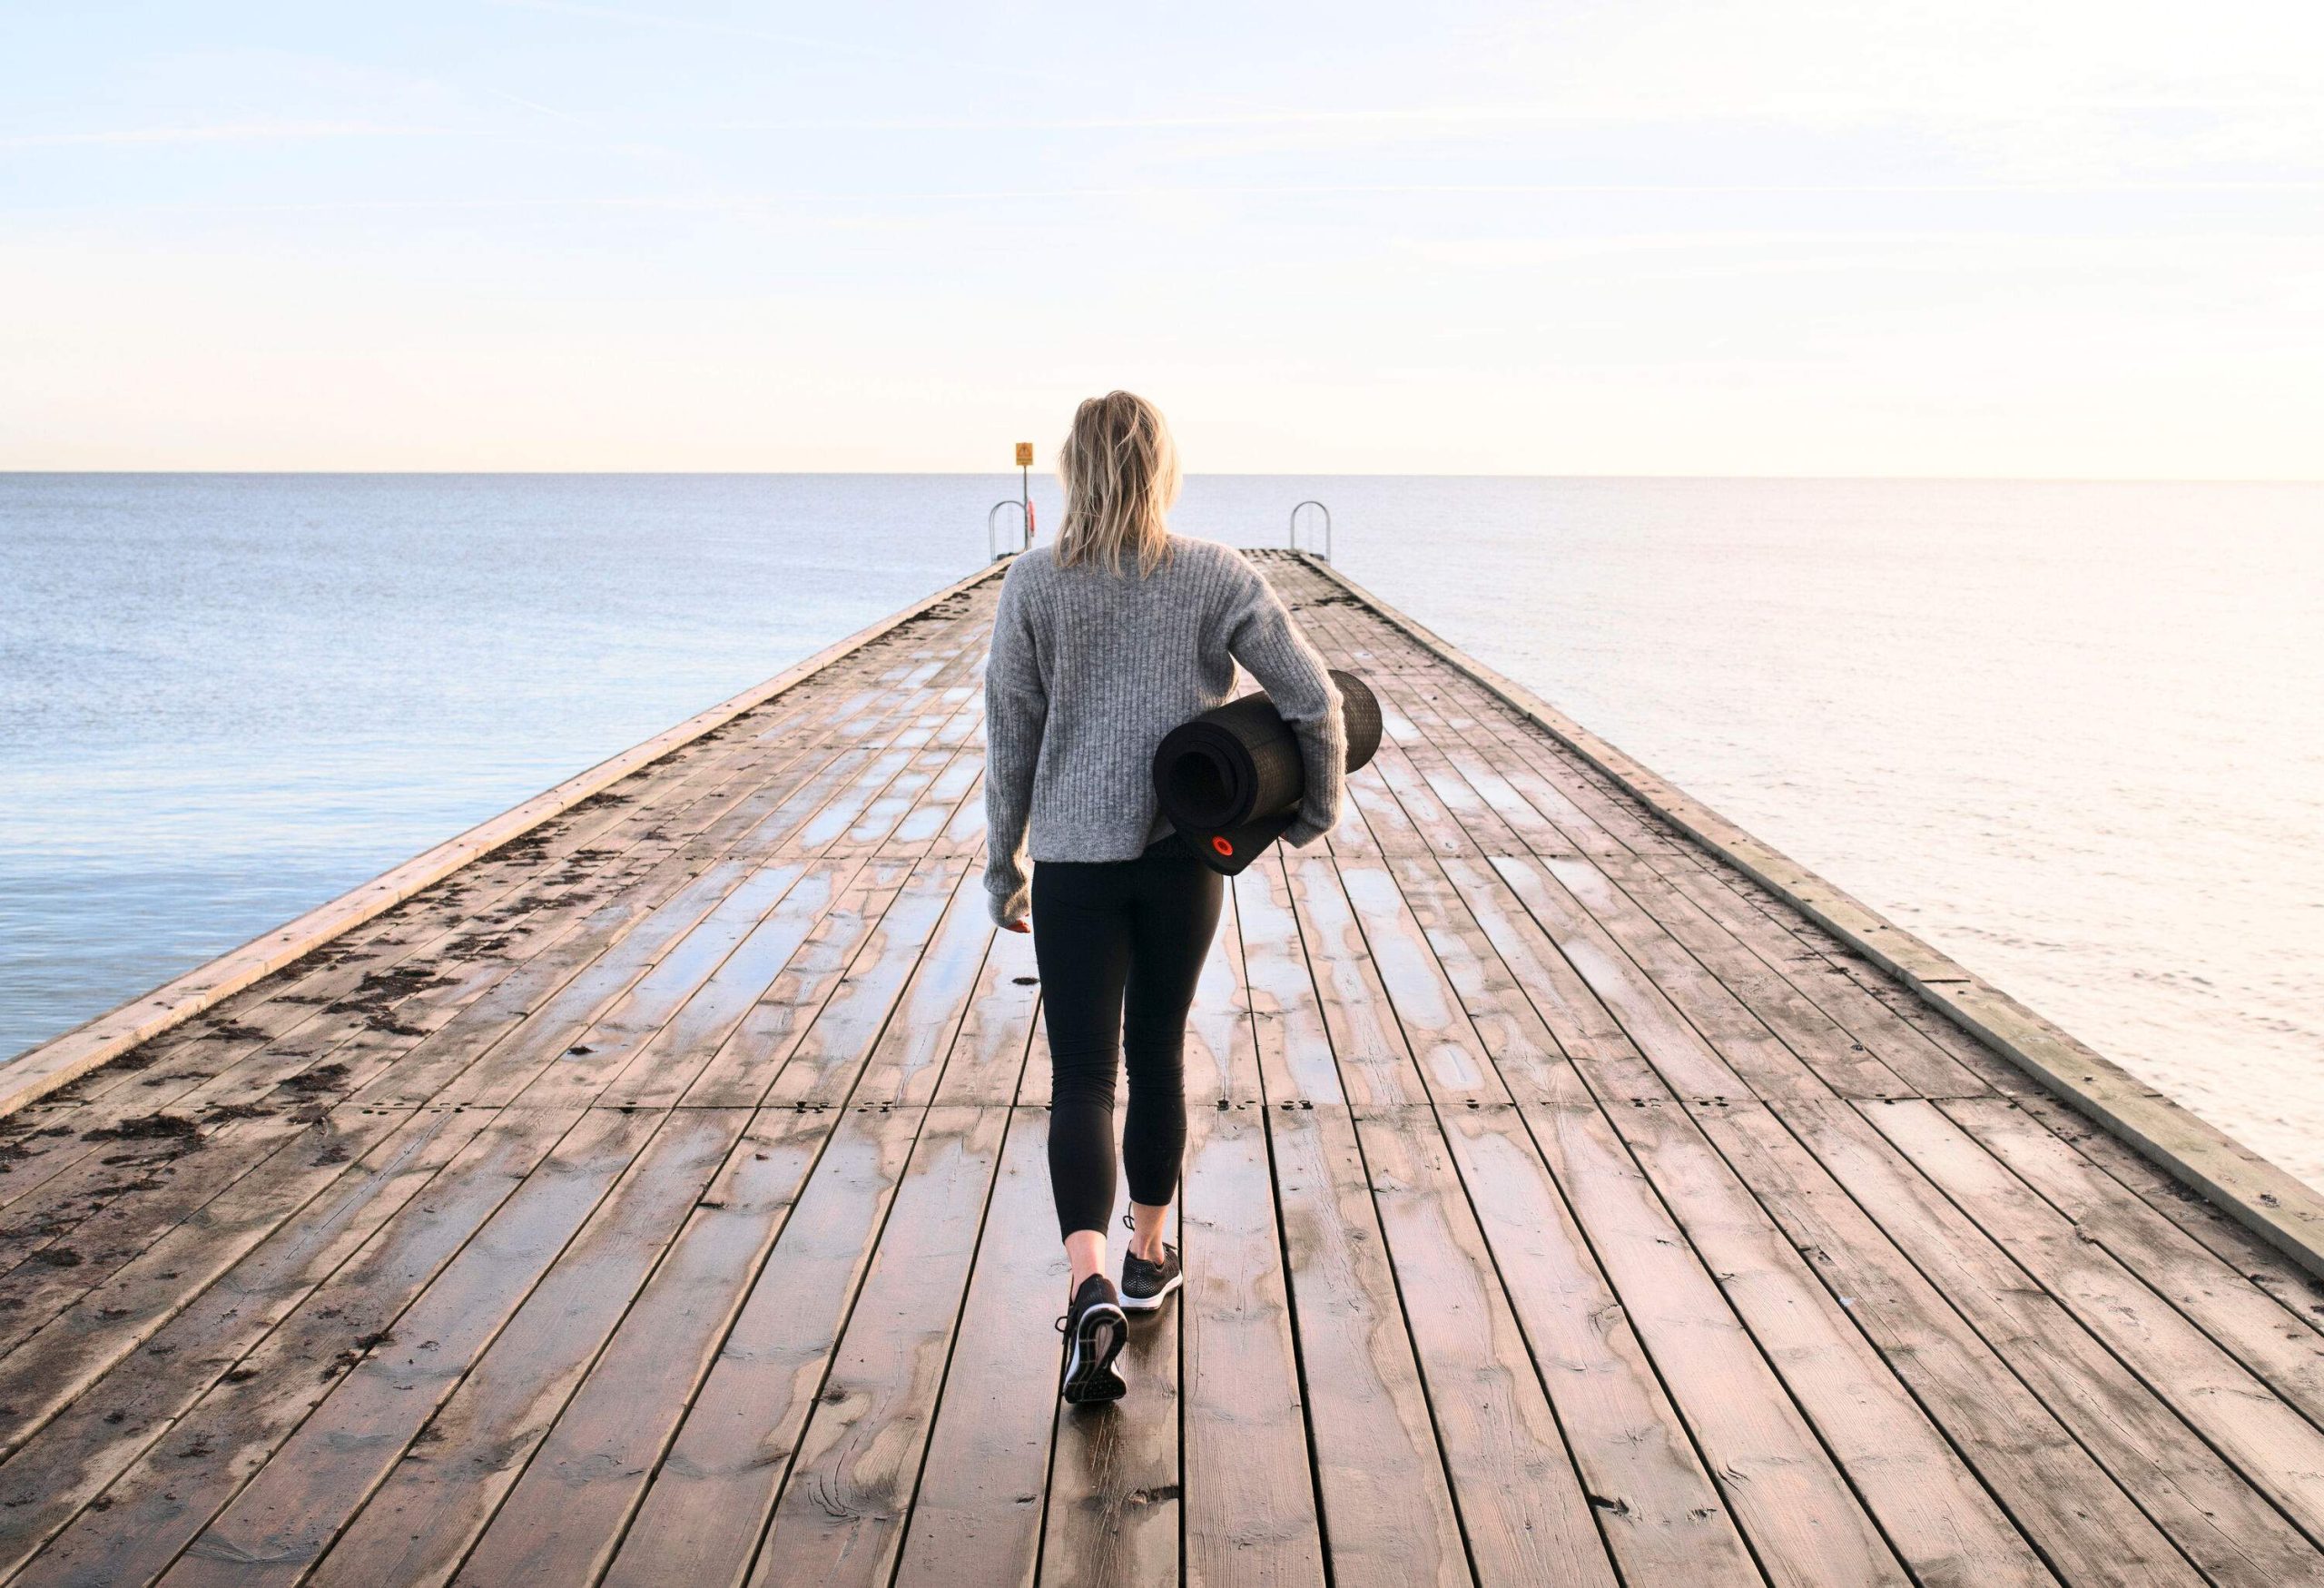 A woman in grey sweater carries a mat as she walks across a wooden pier fronting a vast ocean.